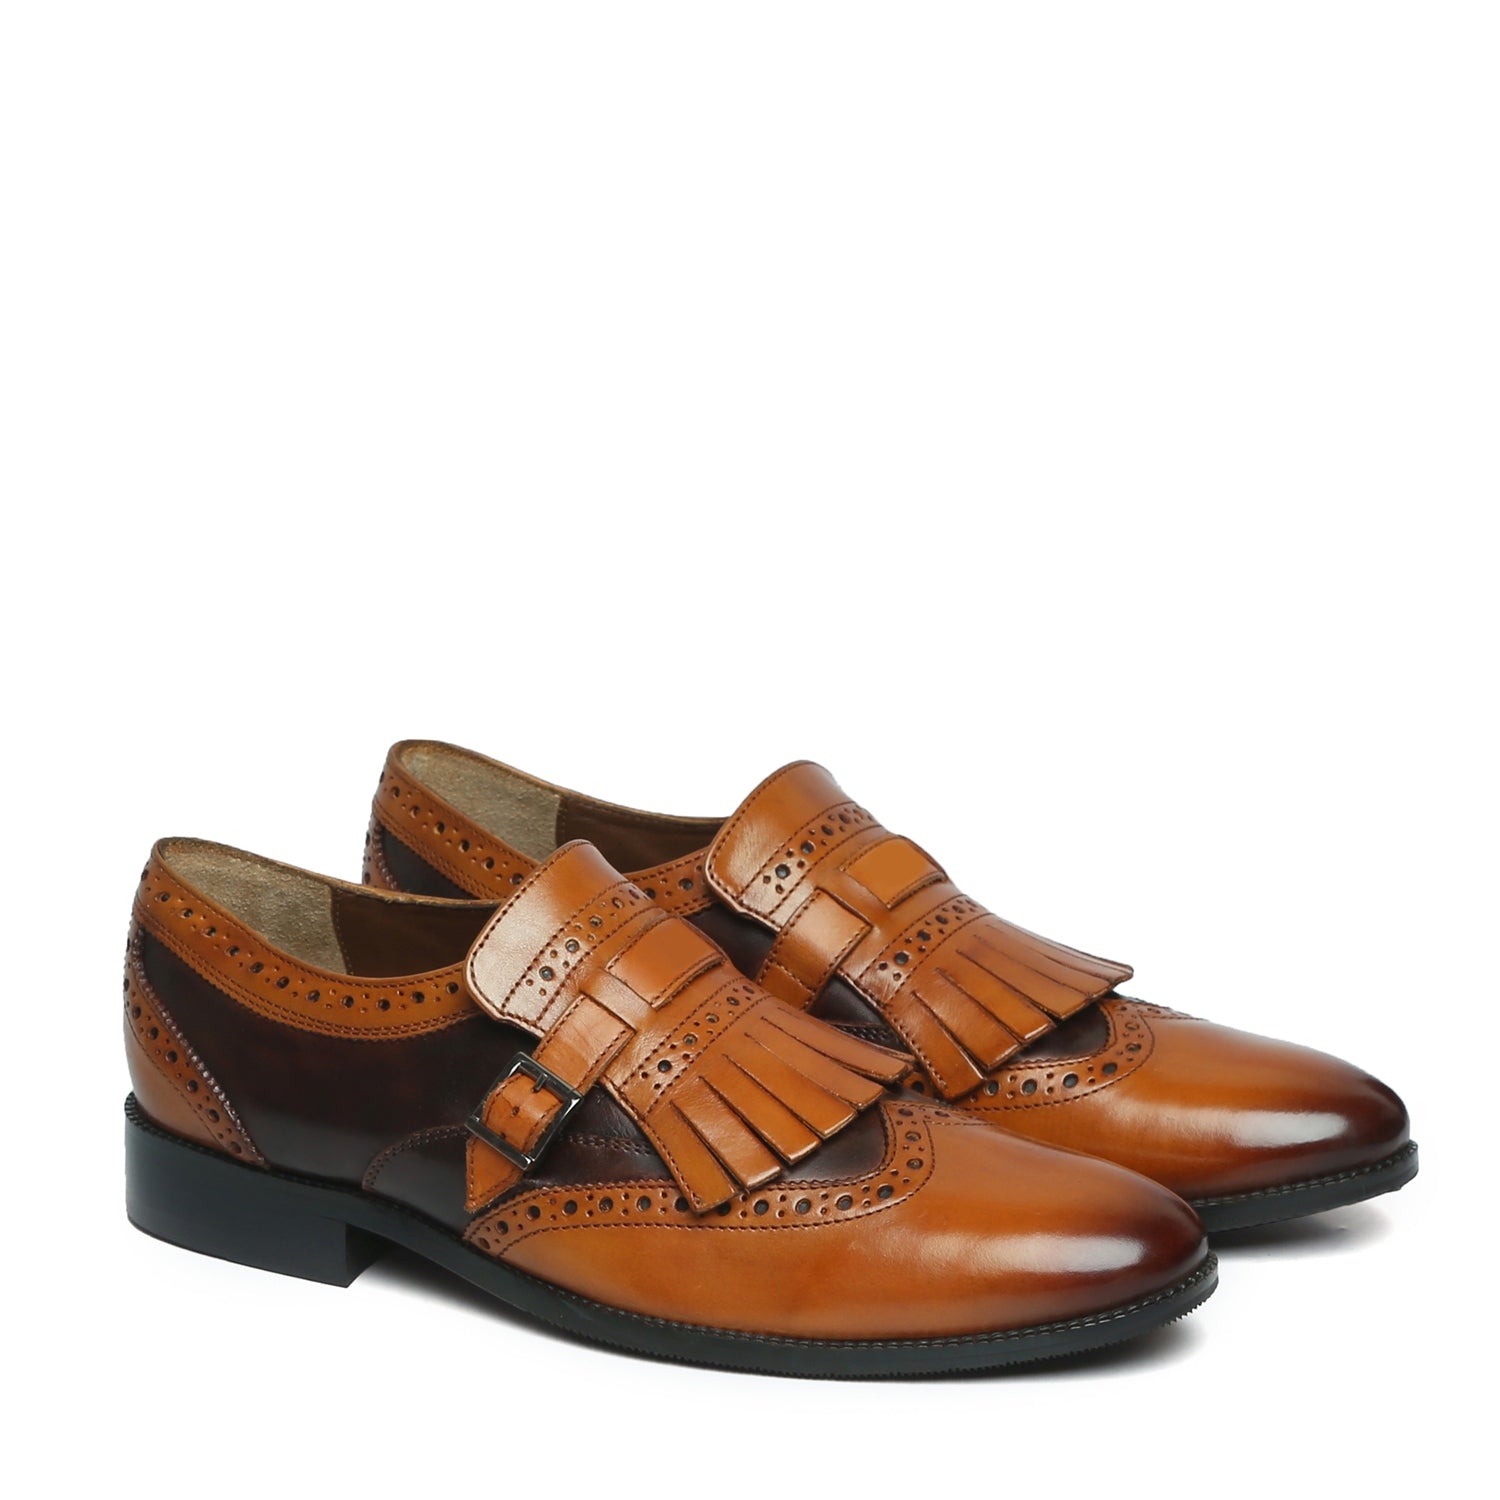 Tan/Brown Leather Fringed Single Monk Strap Shoes By Brune & Bareskin